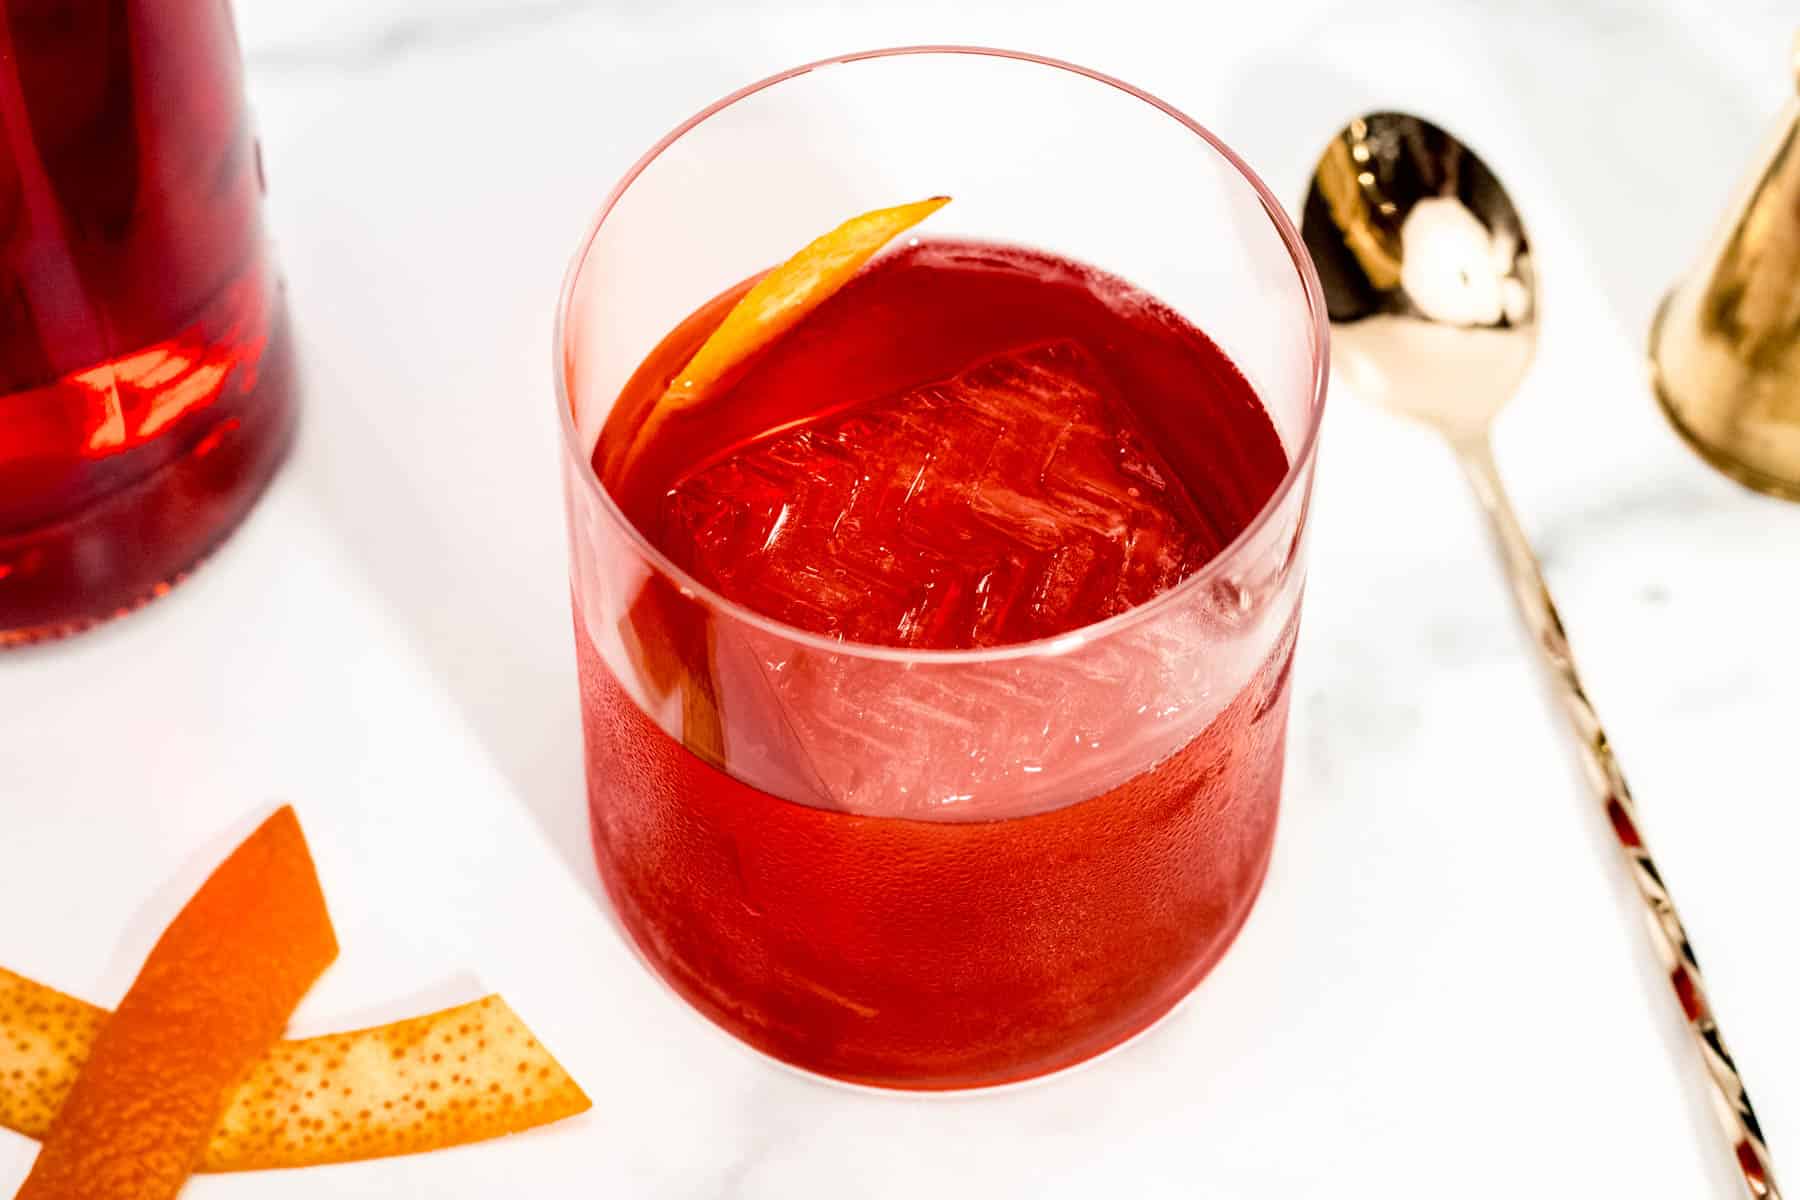 A glass with a Classic Negroni and orange peels.